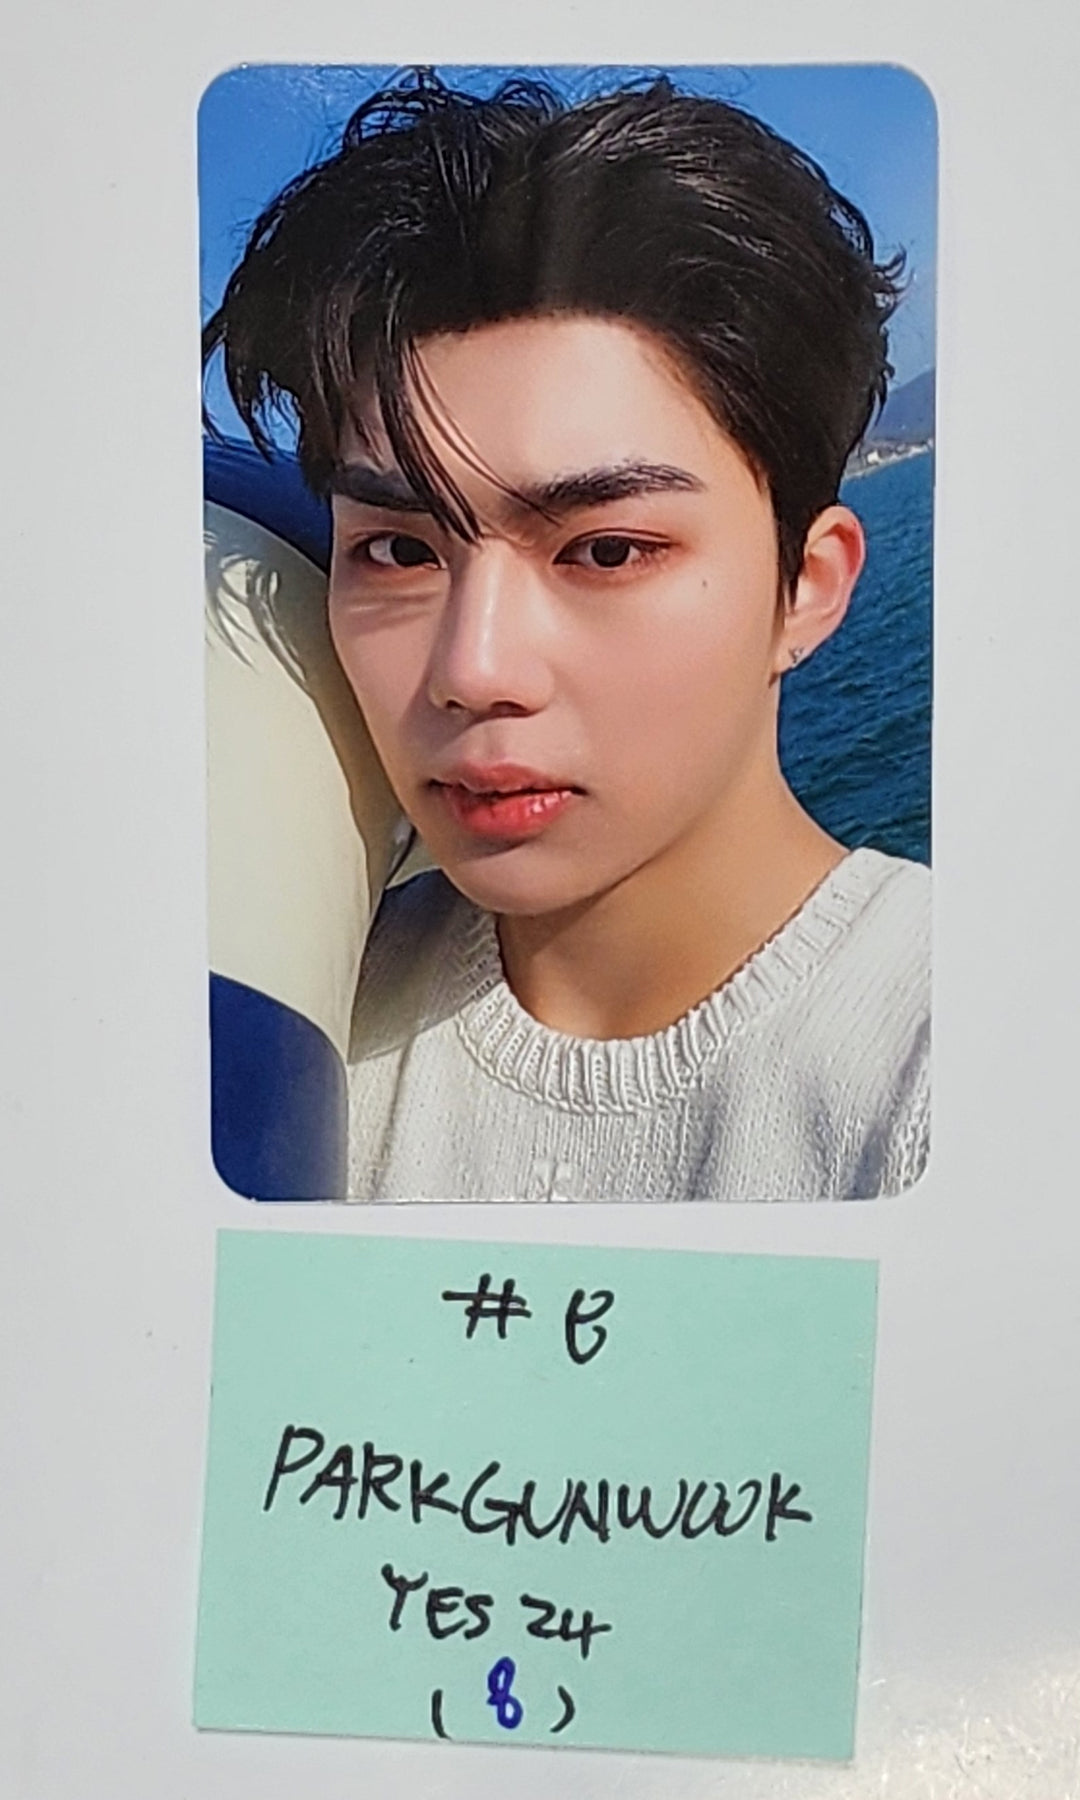 ZEROBASEONE(ZB1) "You had me at HELLO" - Yes24 Pre-Order Benefit Photocard [24.5.17]